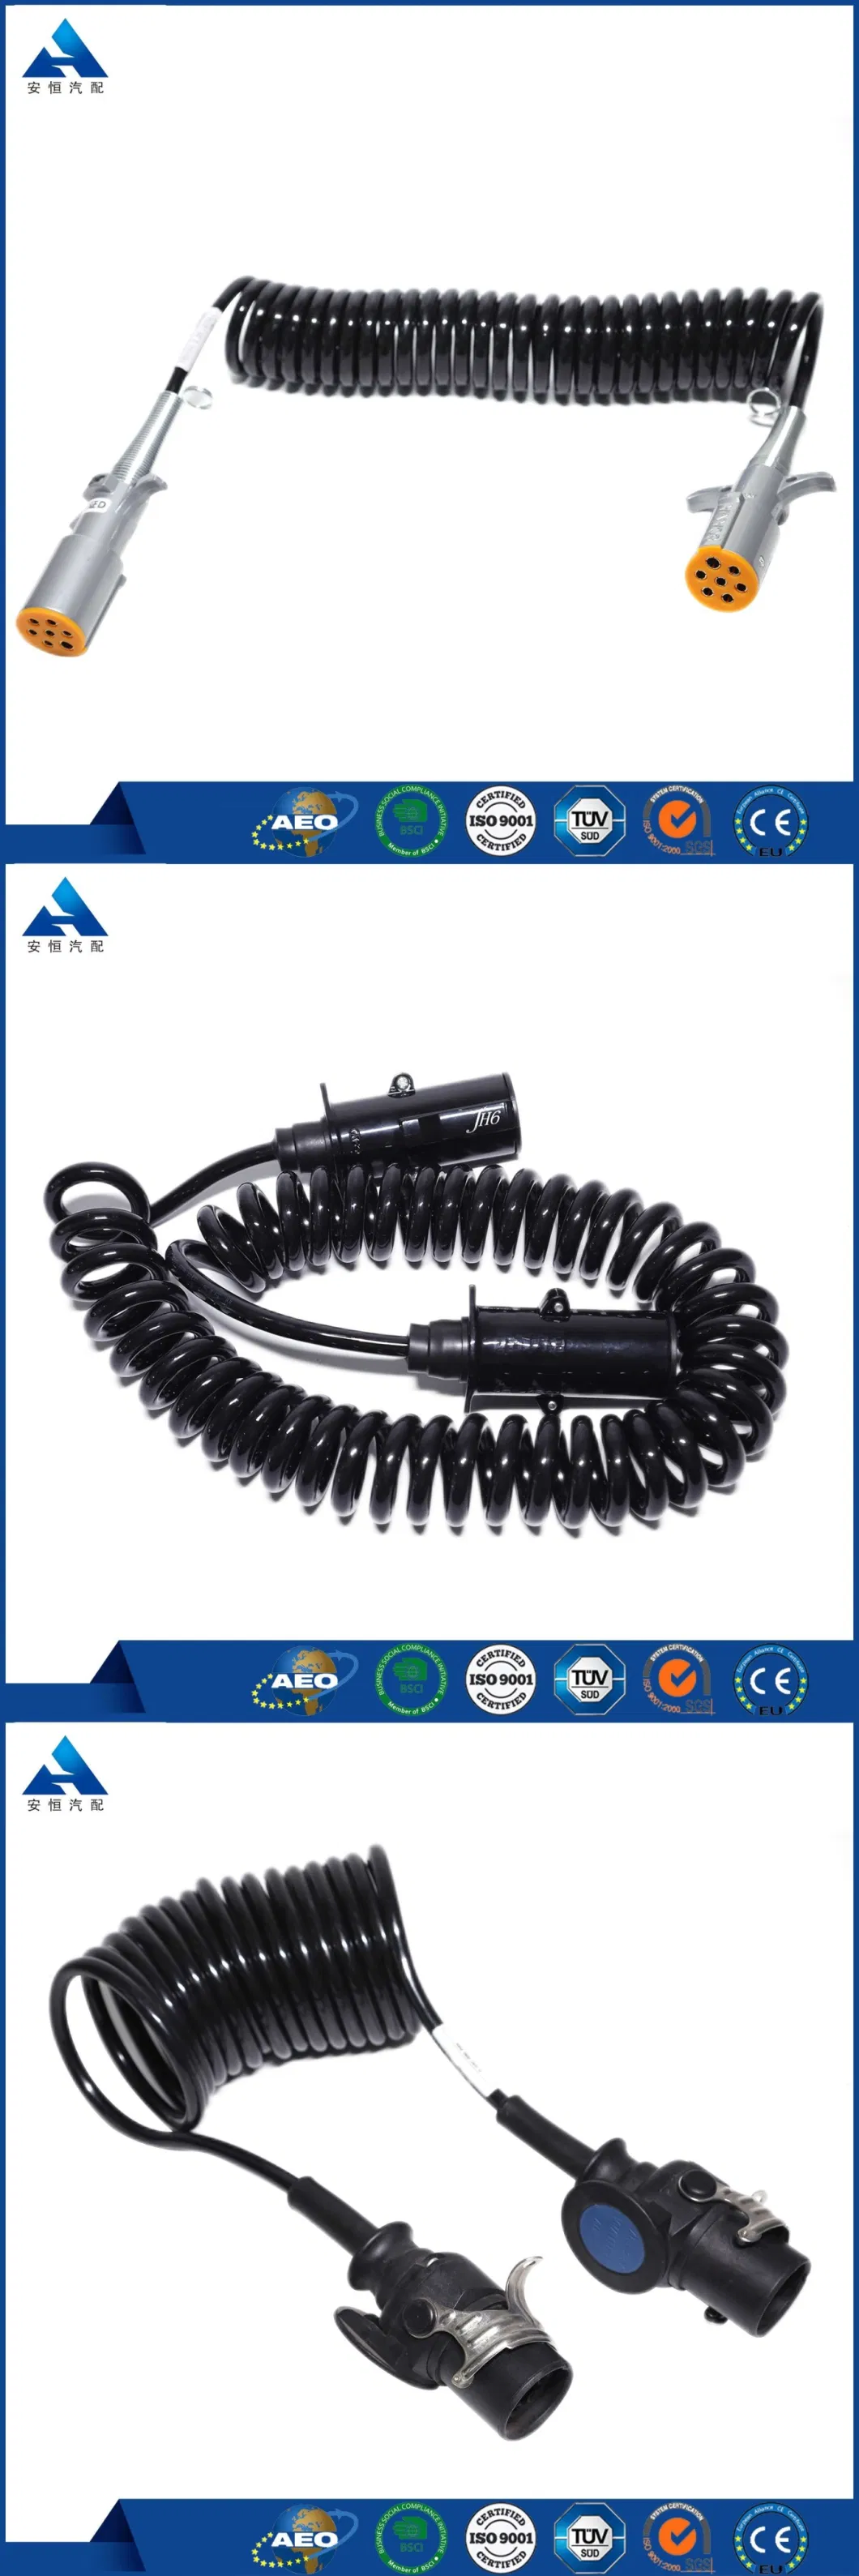 Heavy Duty 7-Core Automotive Electrical Extension Cord Coiled Spiral Cable Truck Trailer Electrical Coiled Cable